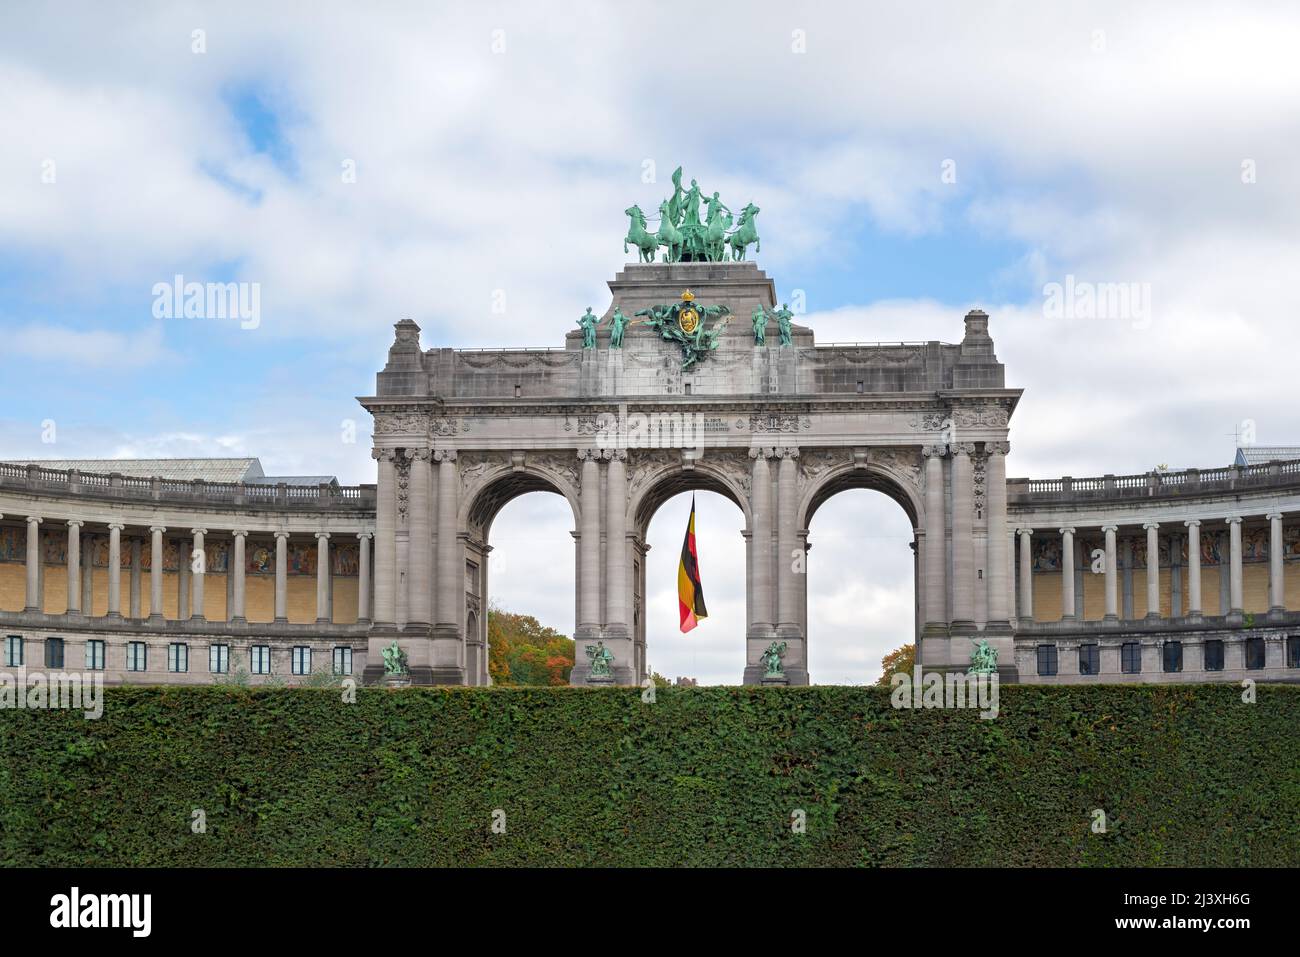 View of the Triumphal Arch (Cinquantenaire Arch) in the Jubilee Park, Brussels Belgium Stock Photo